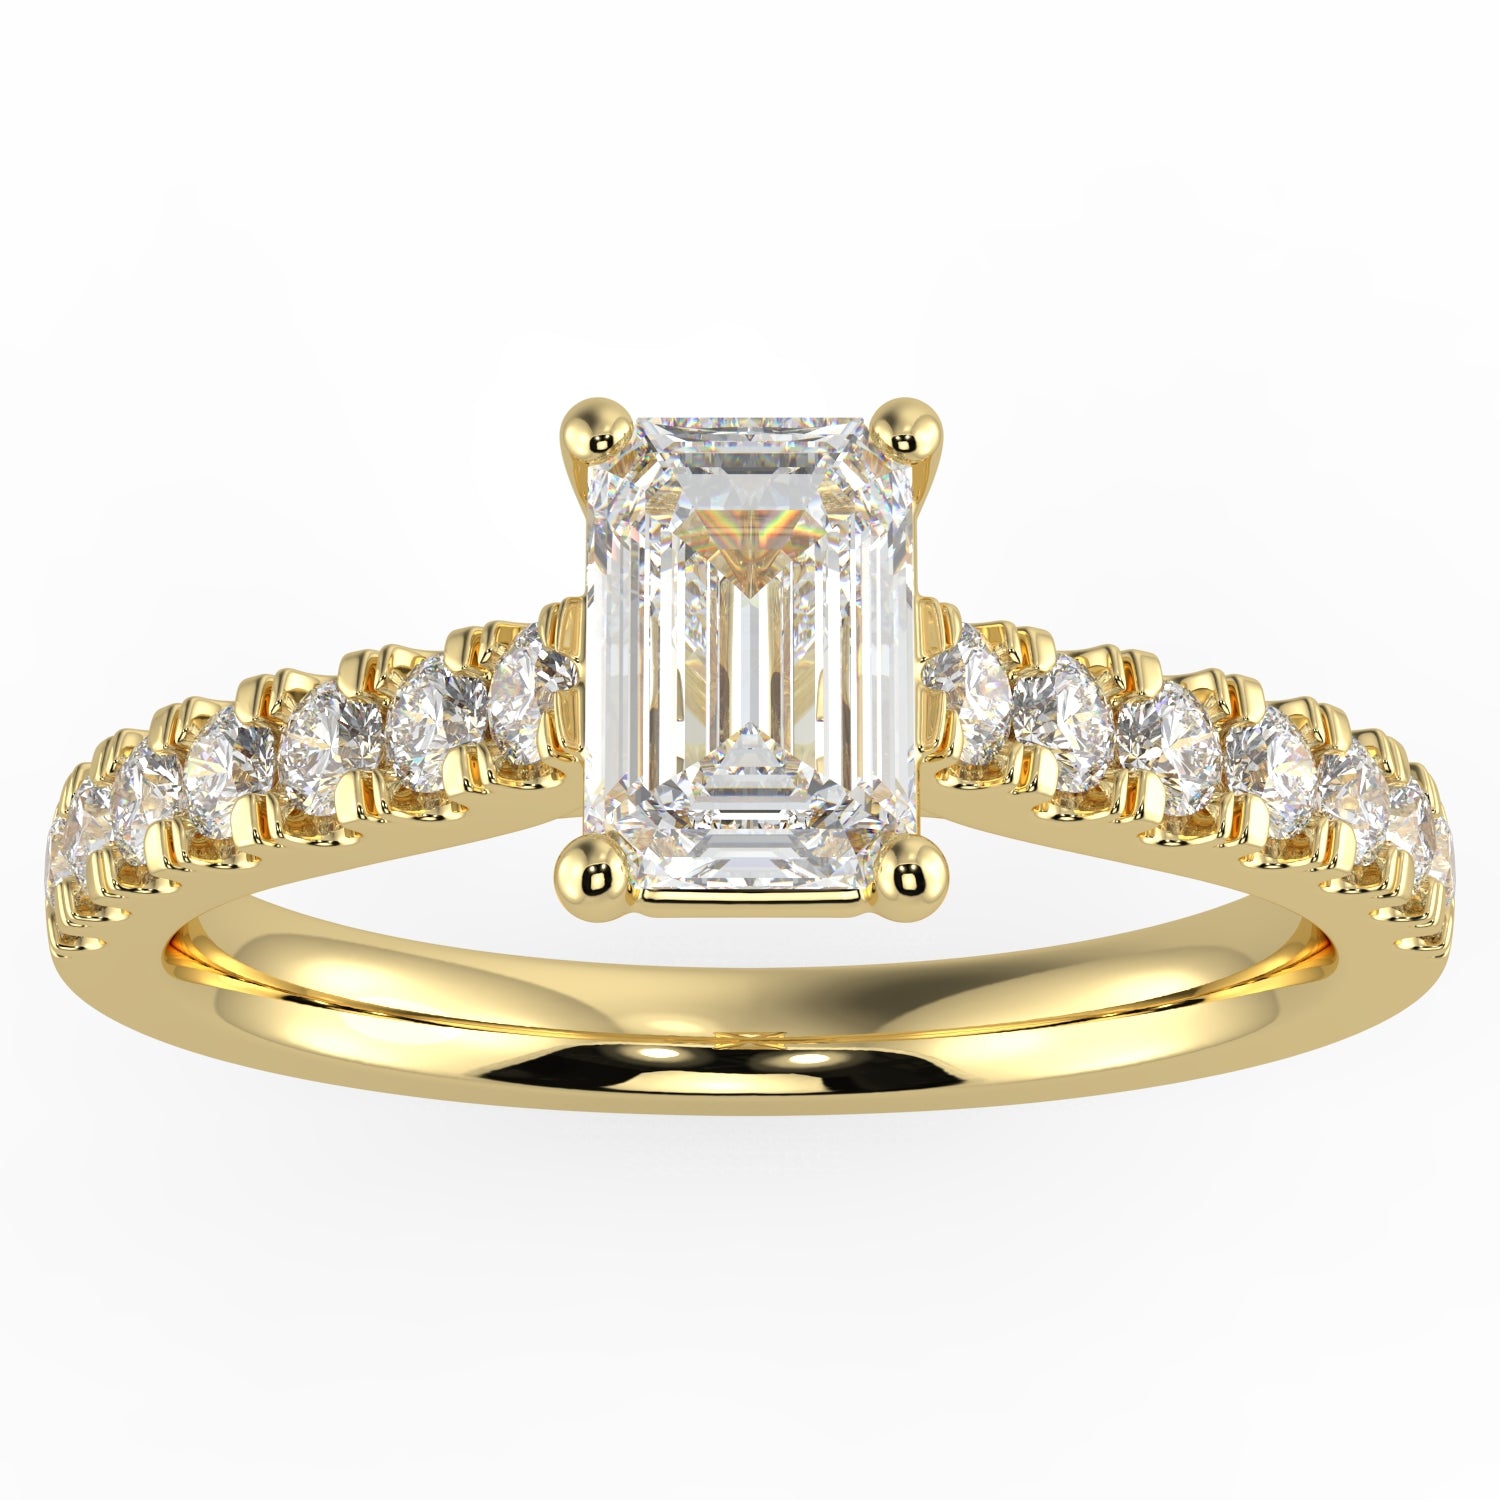 Natural Diamond Slim Shank Ring with 0.70ctw Emerald Shape Center & 0.30 Round Side GHI1 Stones Set on 14K Gold